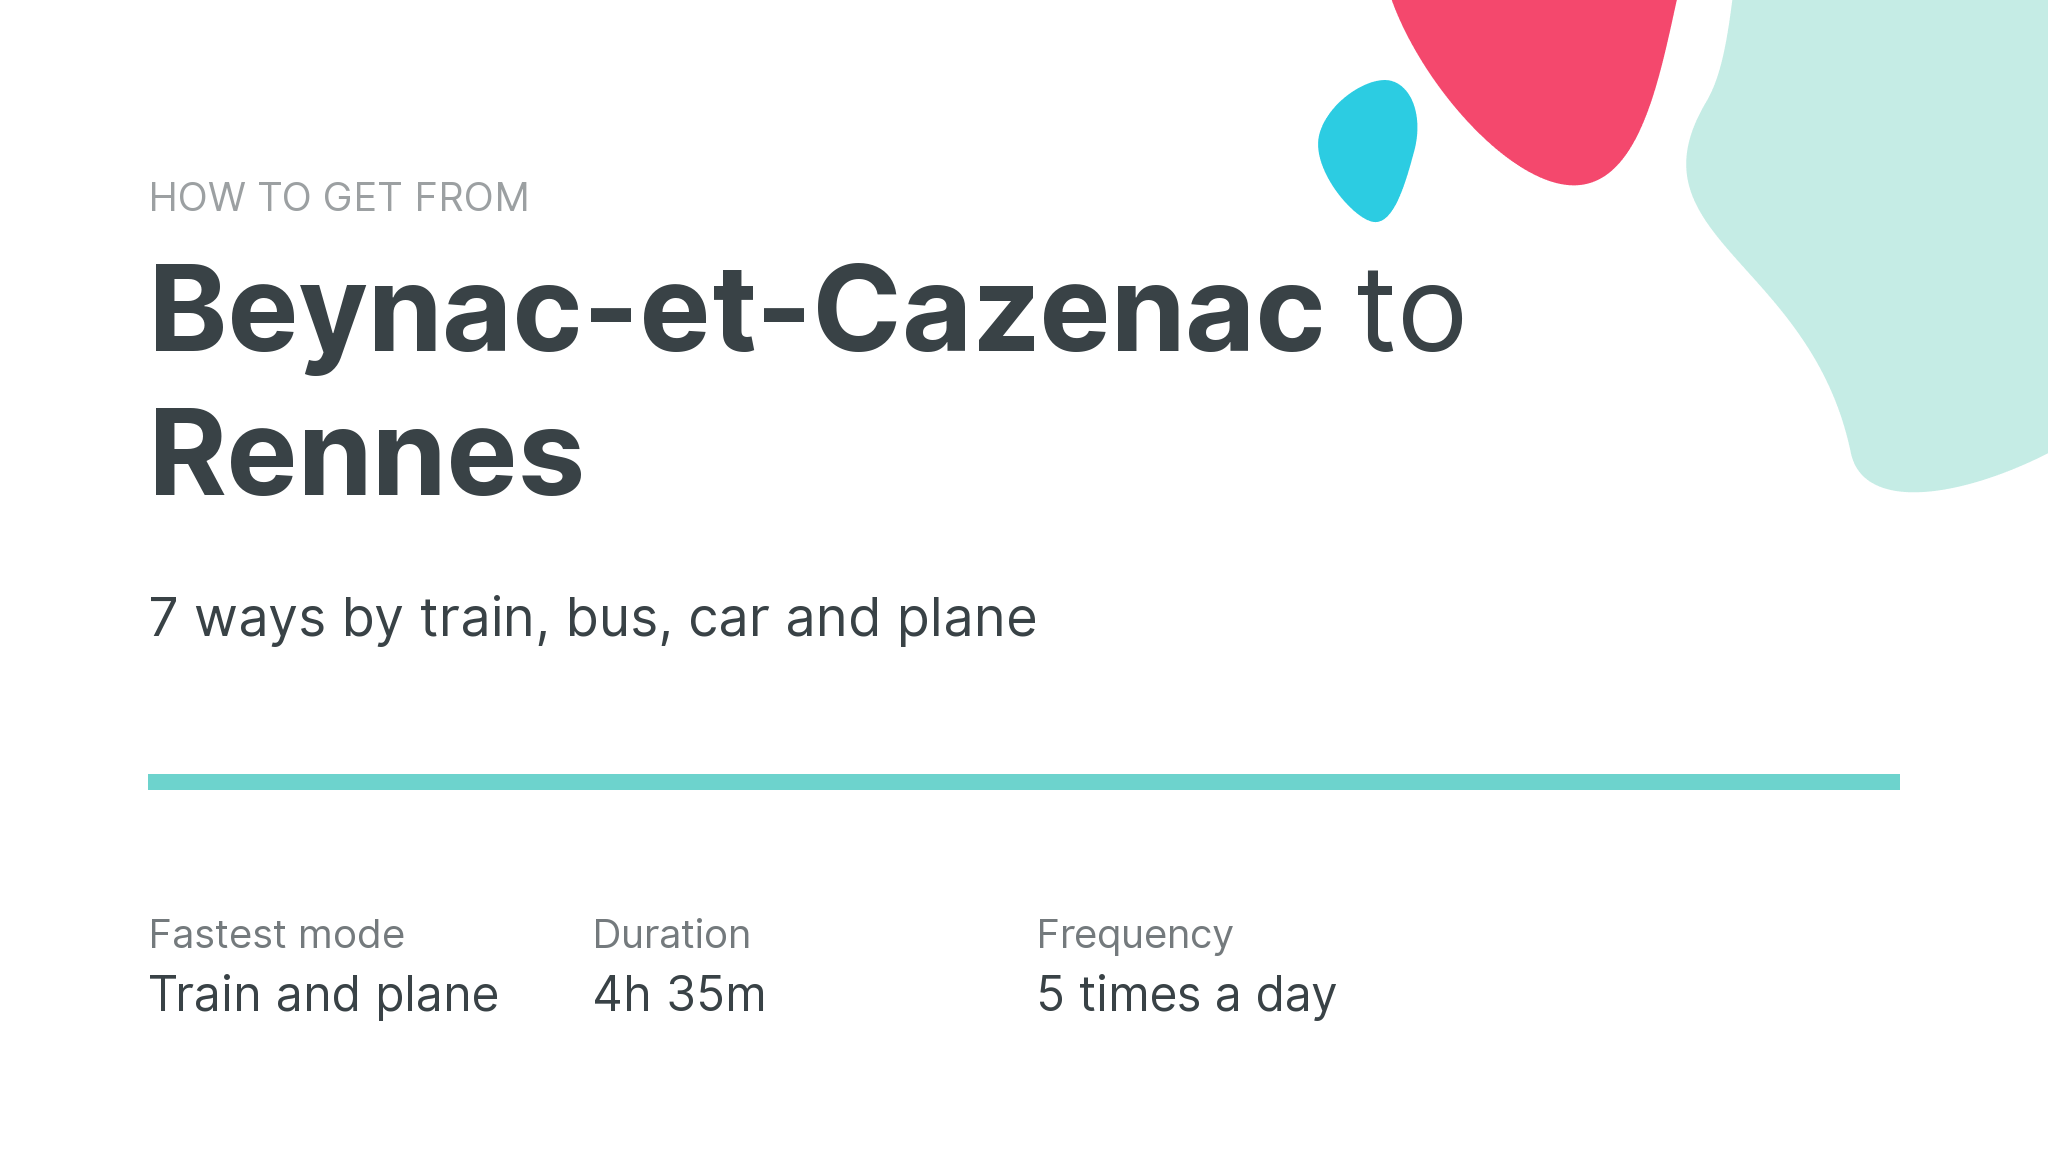 How do I get from Beynac-et-Cazenac to Rennes